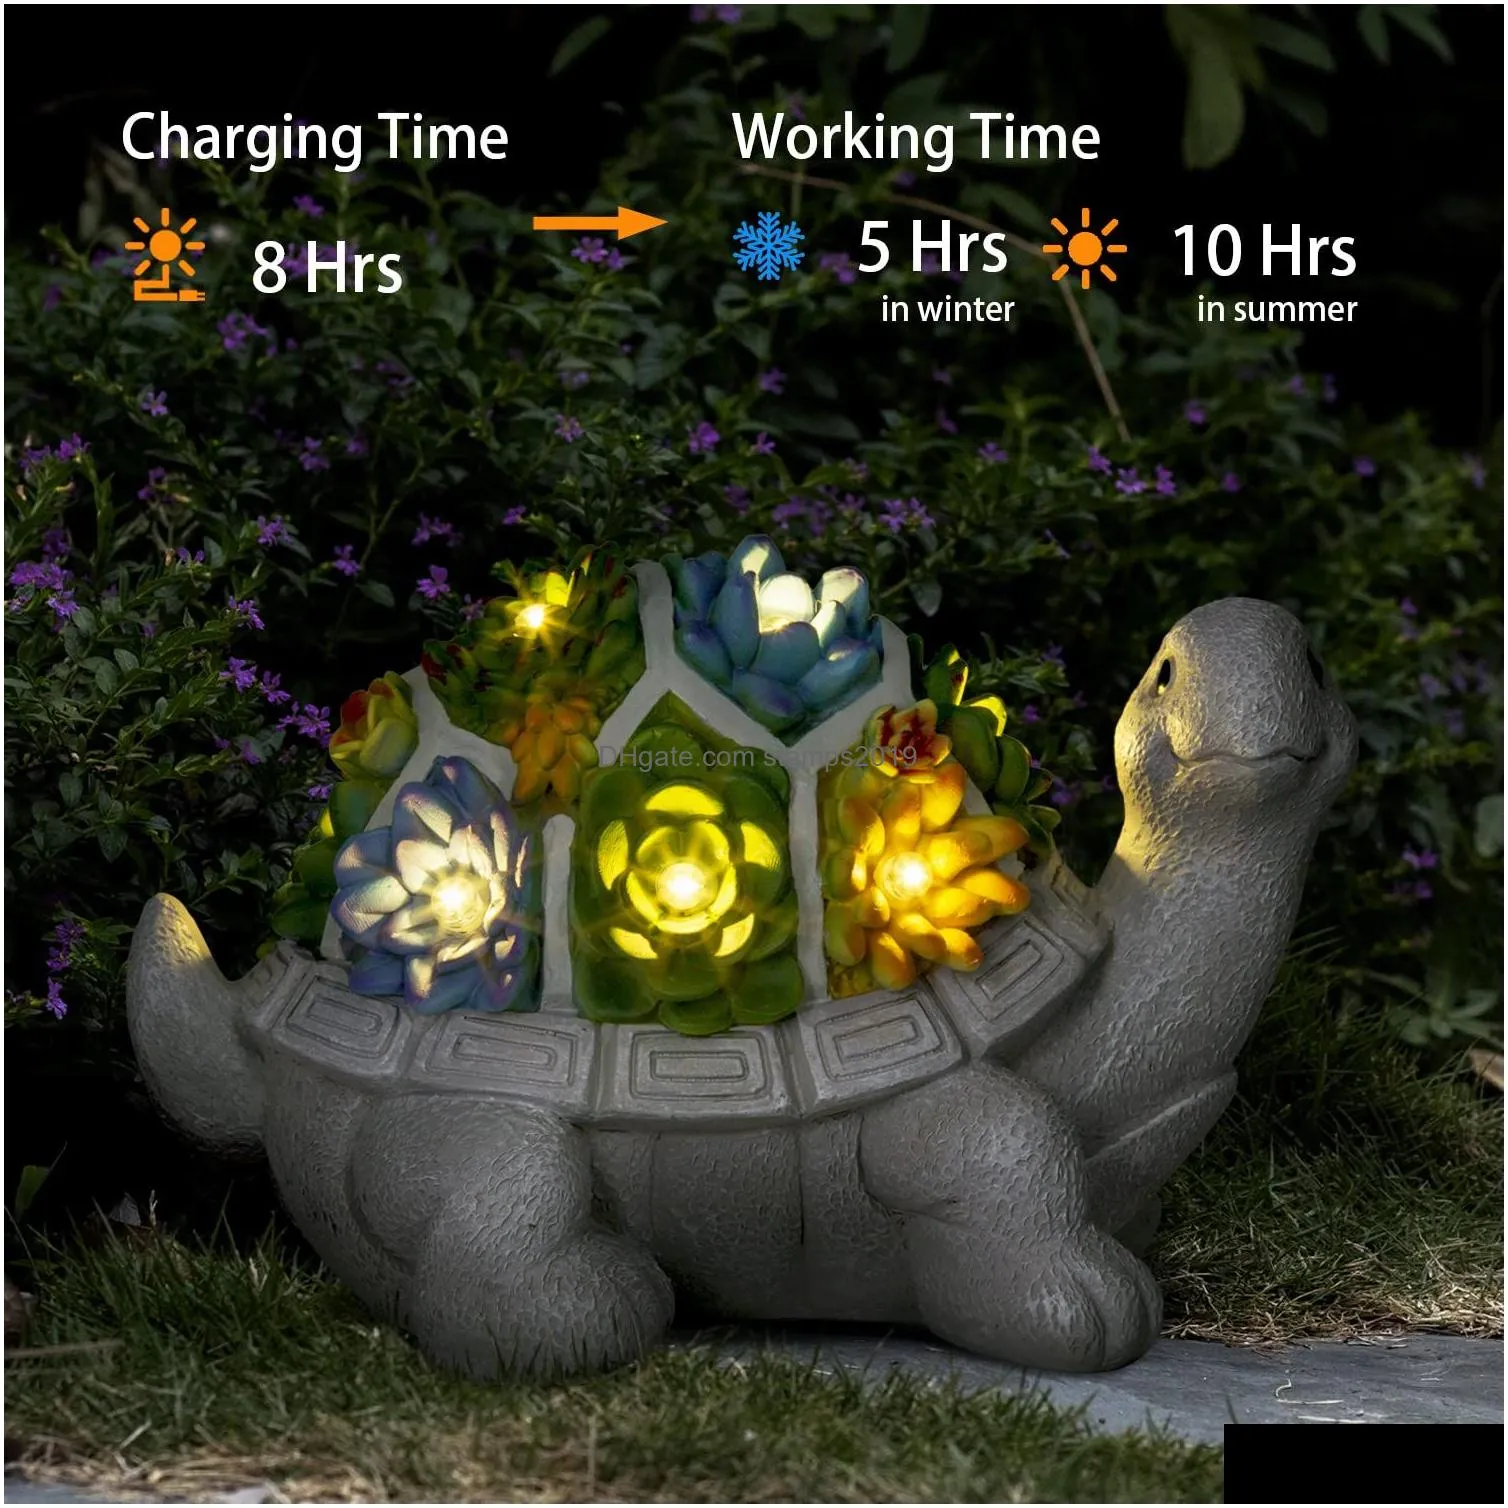 solar garden outdoor statues turtle with succulent and 7 led lights lawn decor tortoise statue for patio balcony yard ornament unique housewarming